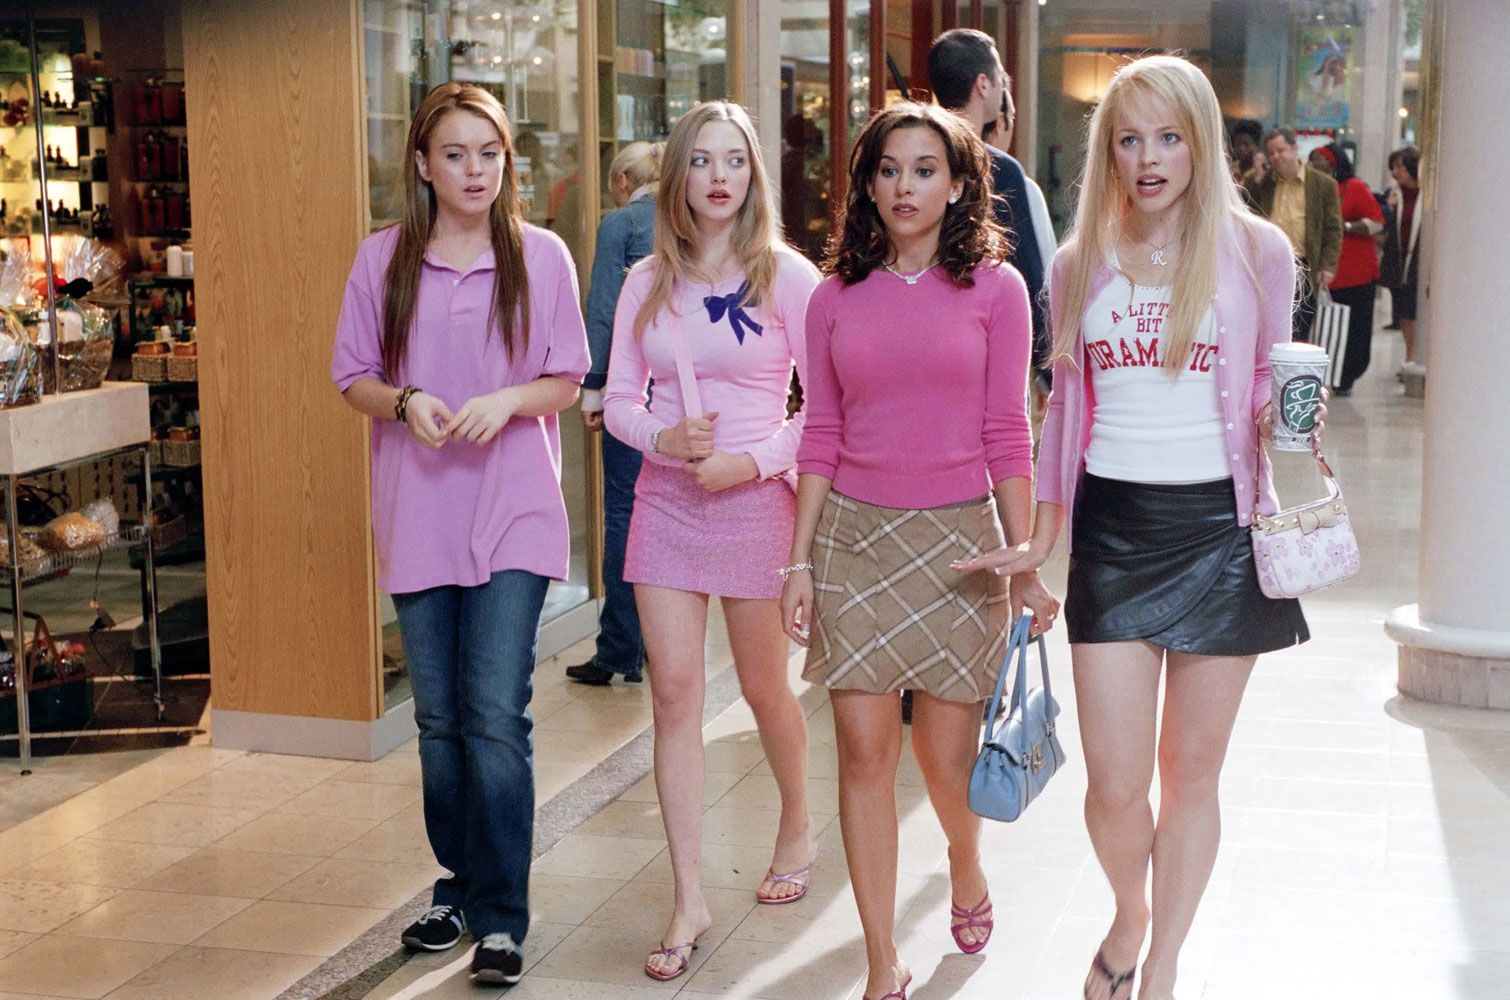 Gretchen Wieners totally fetch outfits in 'Mean Girls', 2004